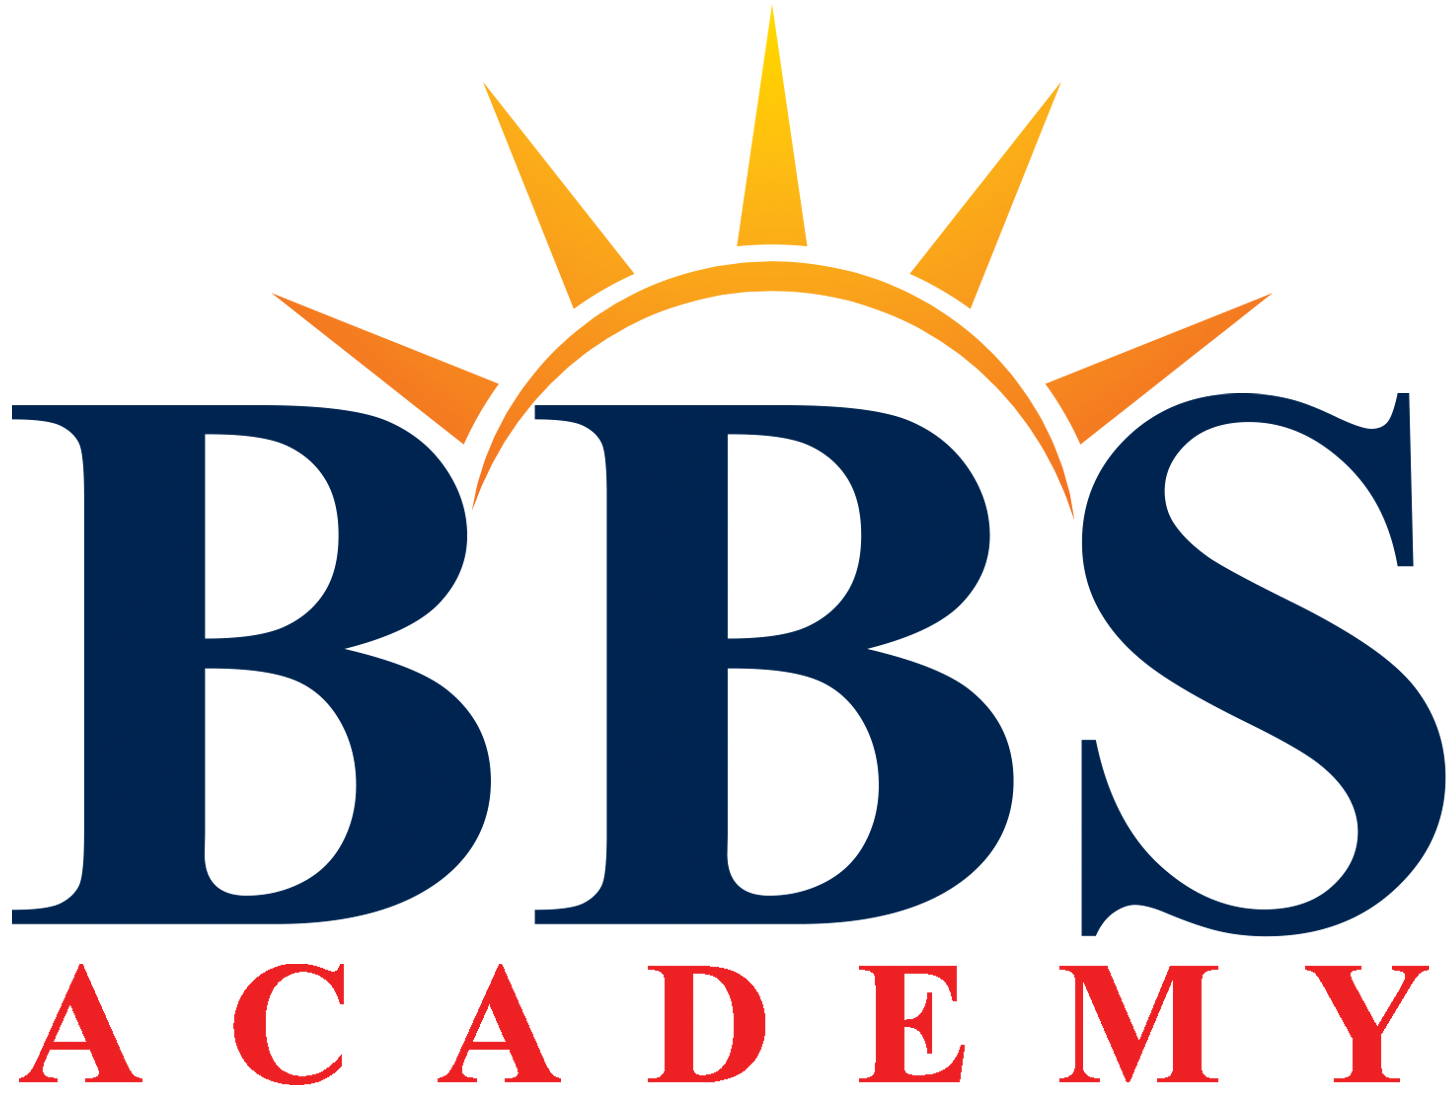 BBS ACADEMY|Coaching Institute|Education